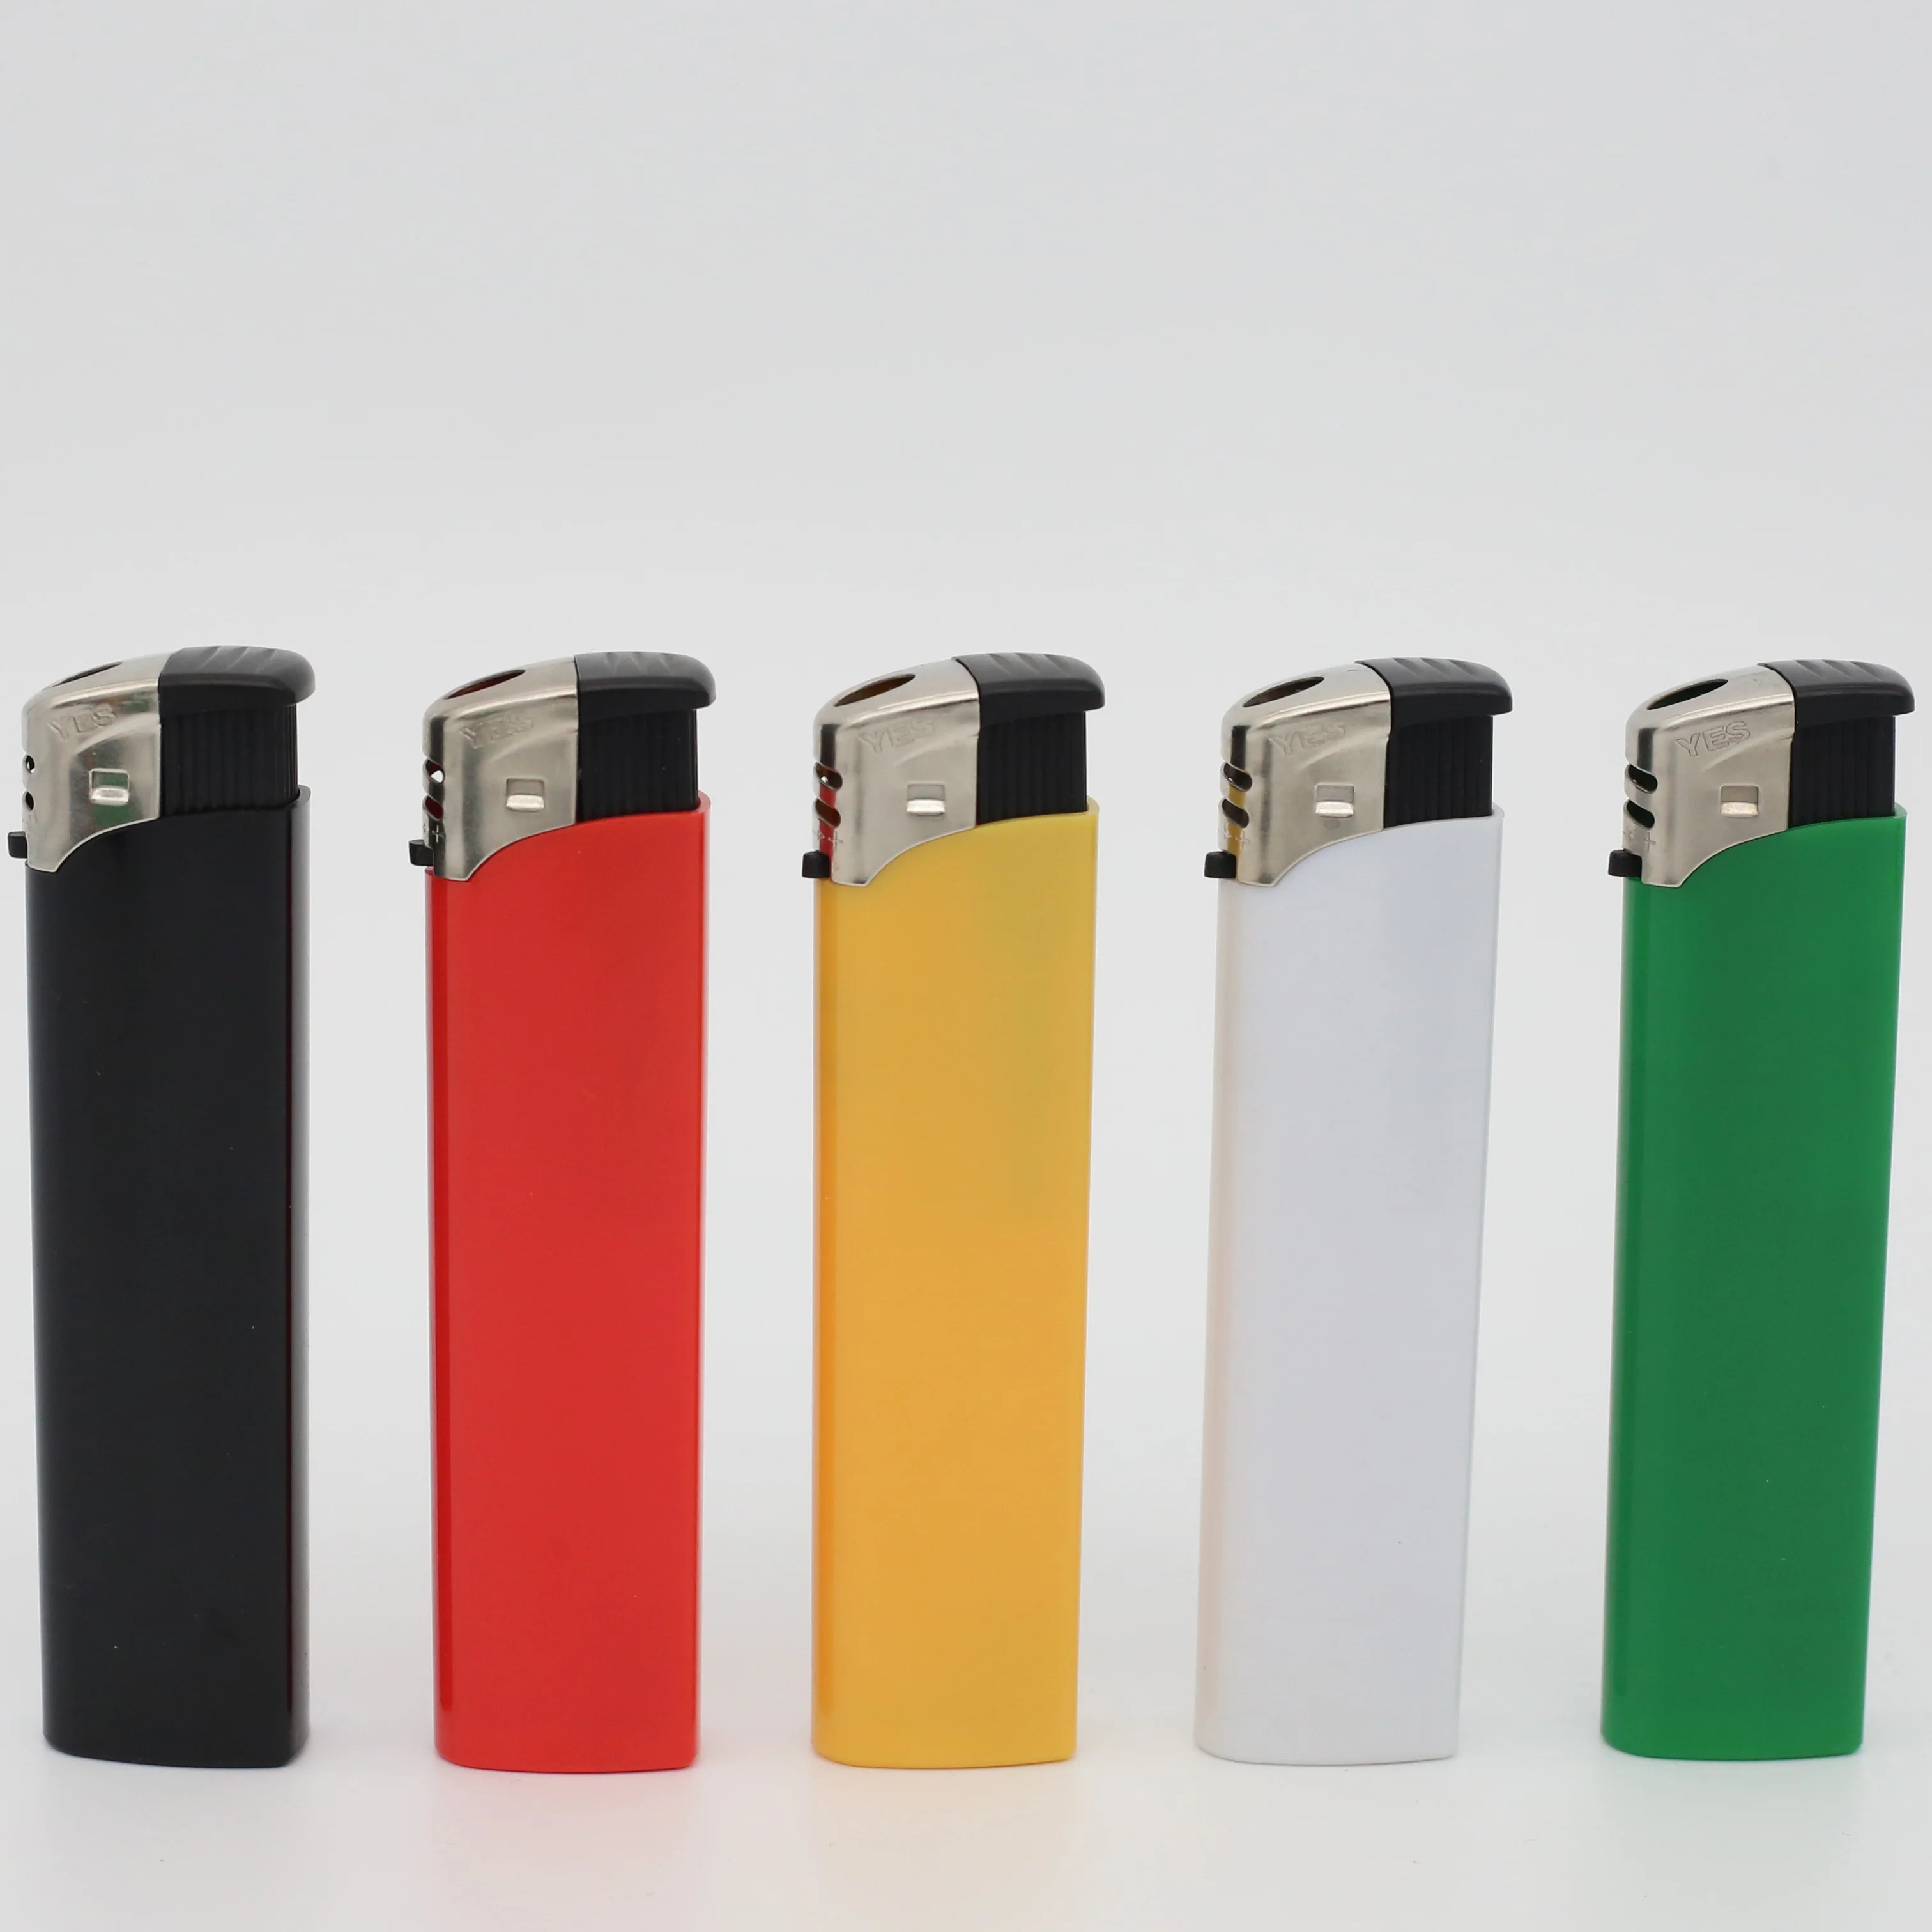 refillable electronic gas cigarette lighter for cigars on m.alibaba.com